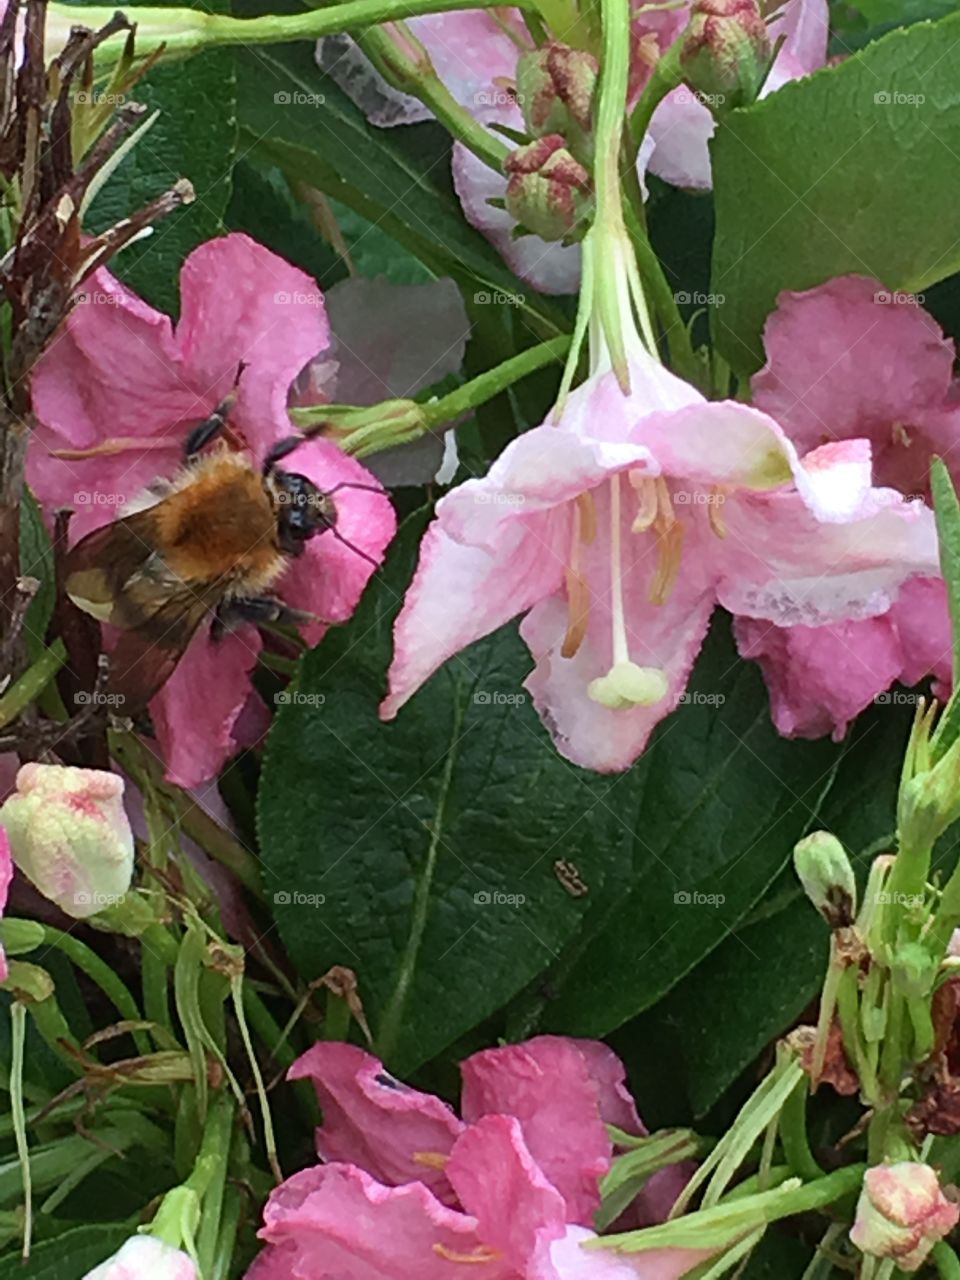 Common carder bee crawling between flowers on a multi-tonal Weigela flower bush in the garden